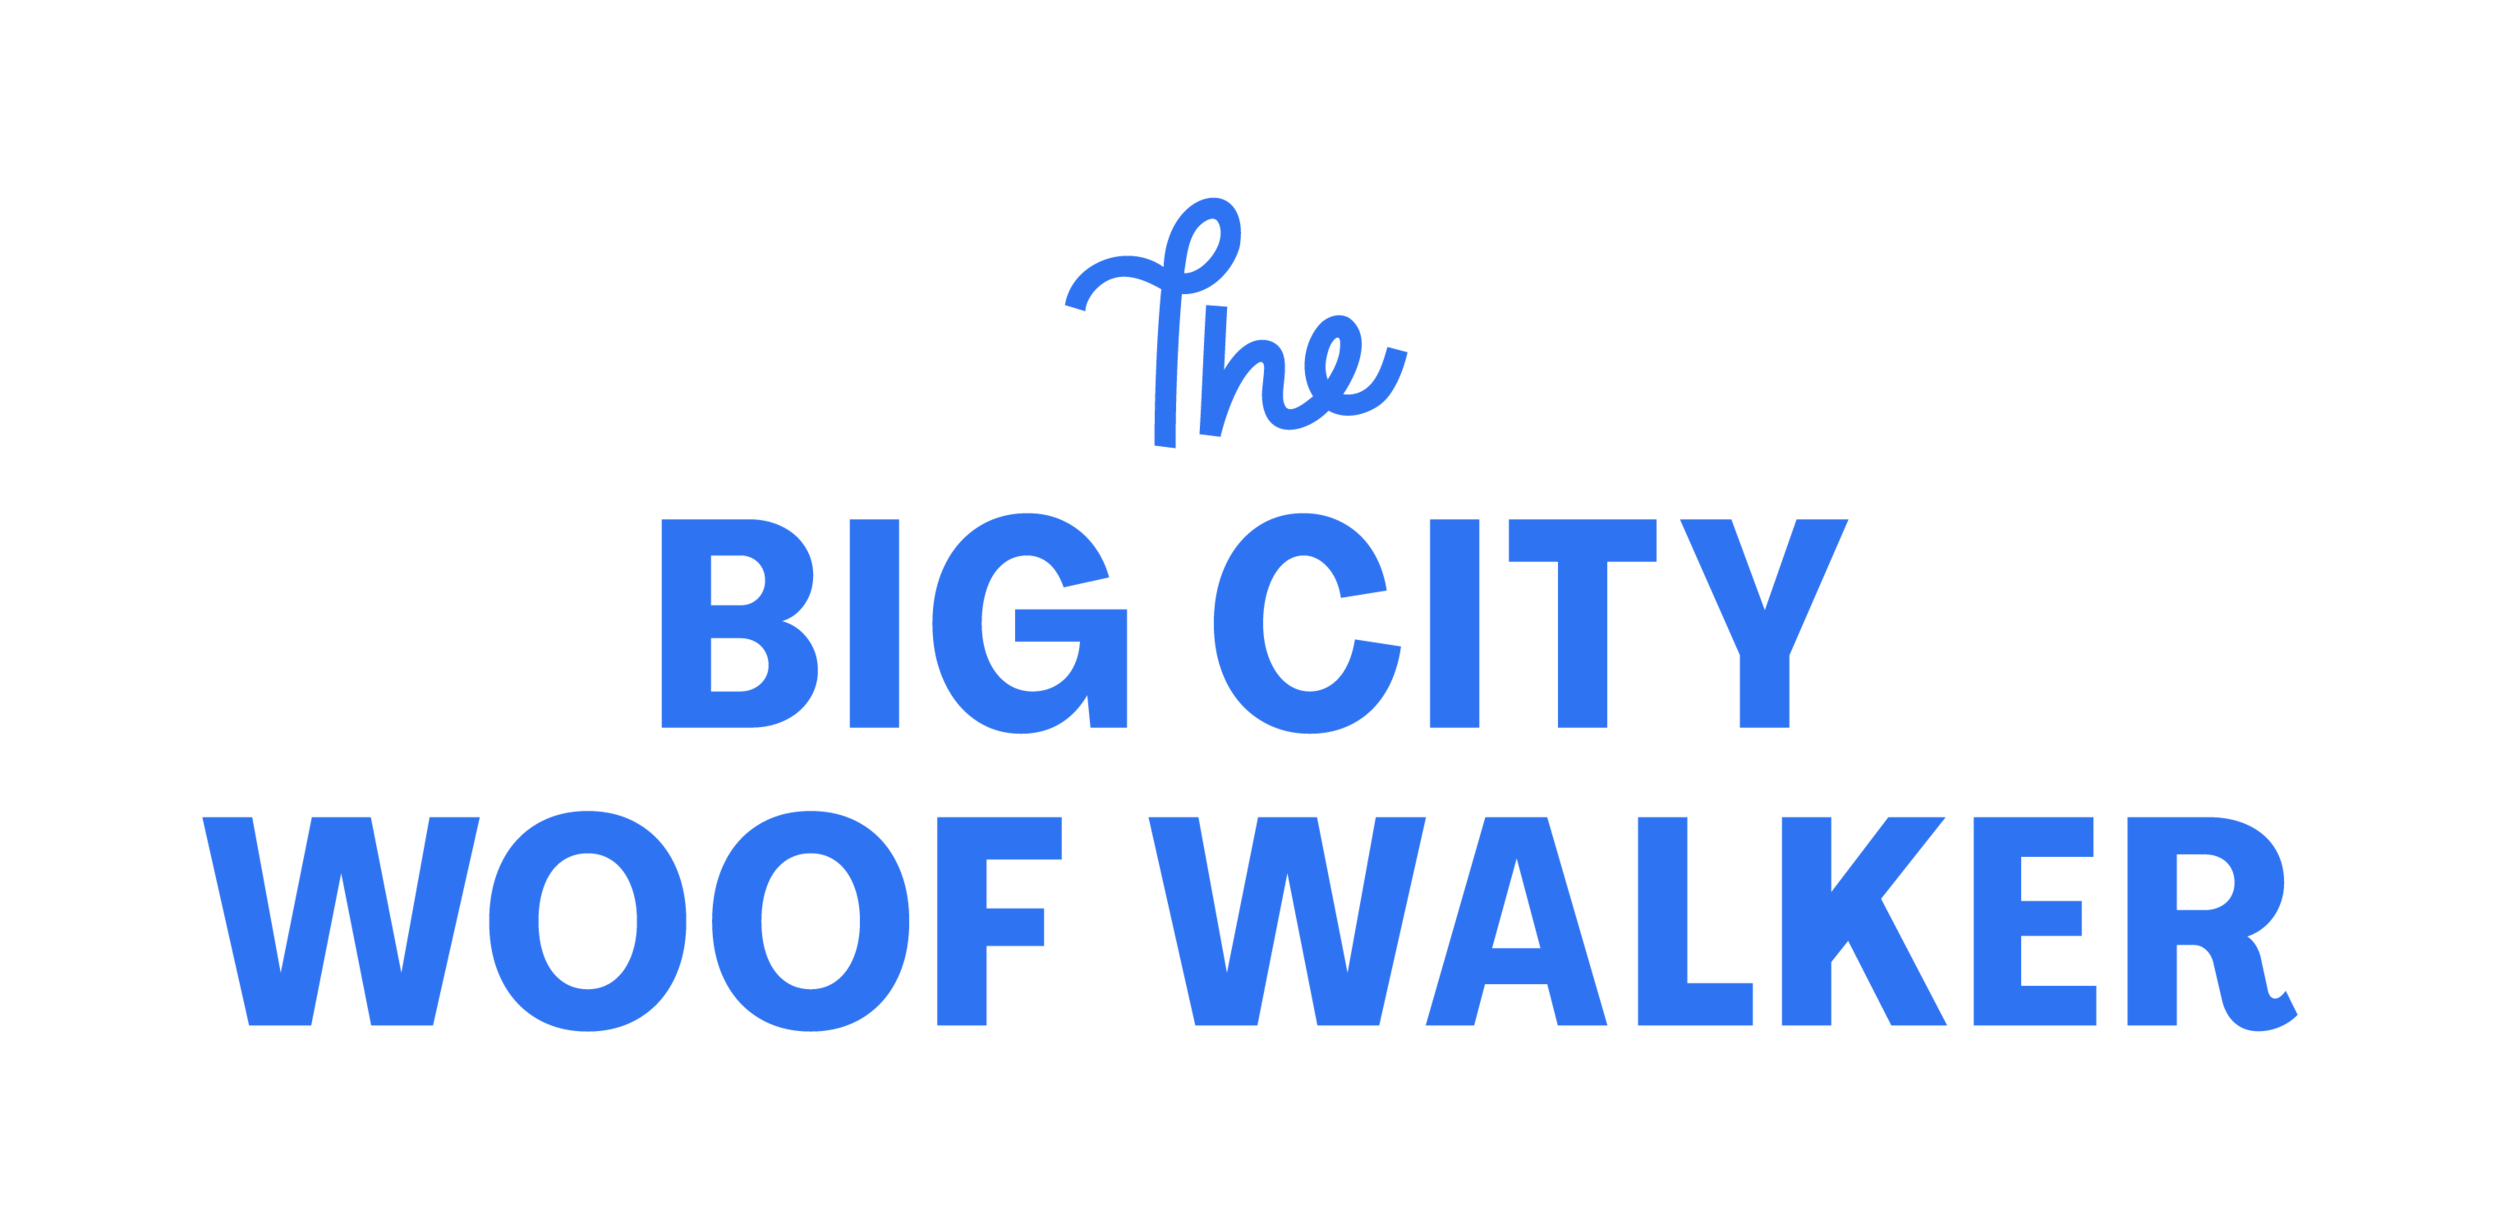  Big City Woof Walker - New York, NY &amp; Chicago, IL   https://thebigcitywoofwalker.com/  